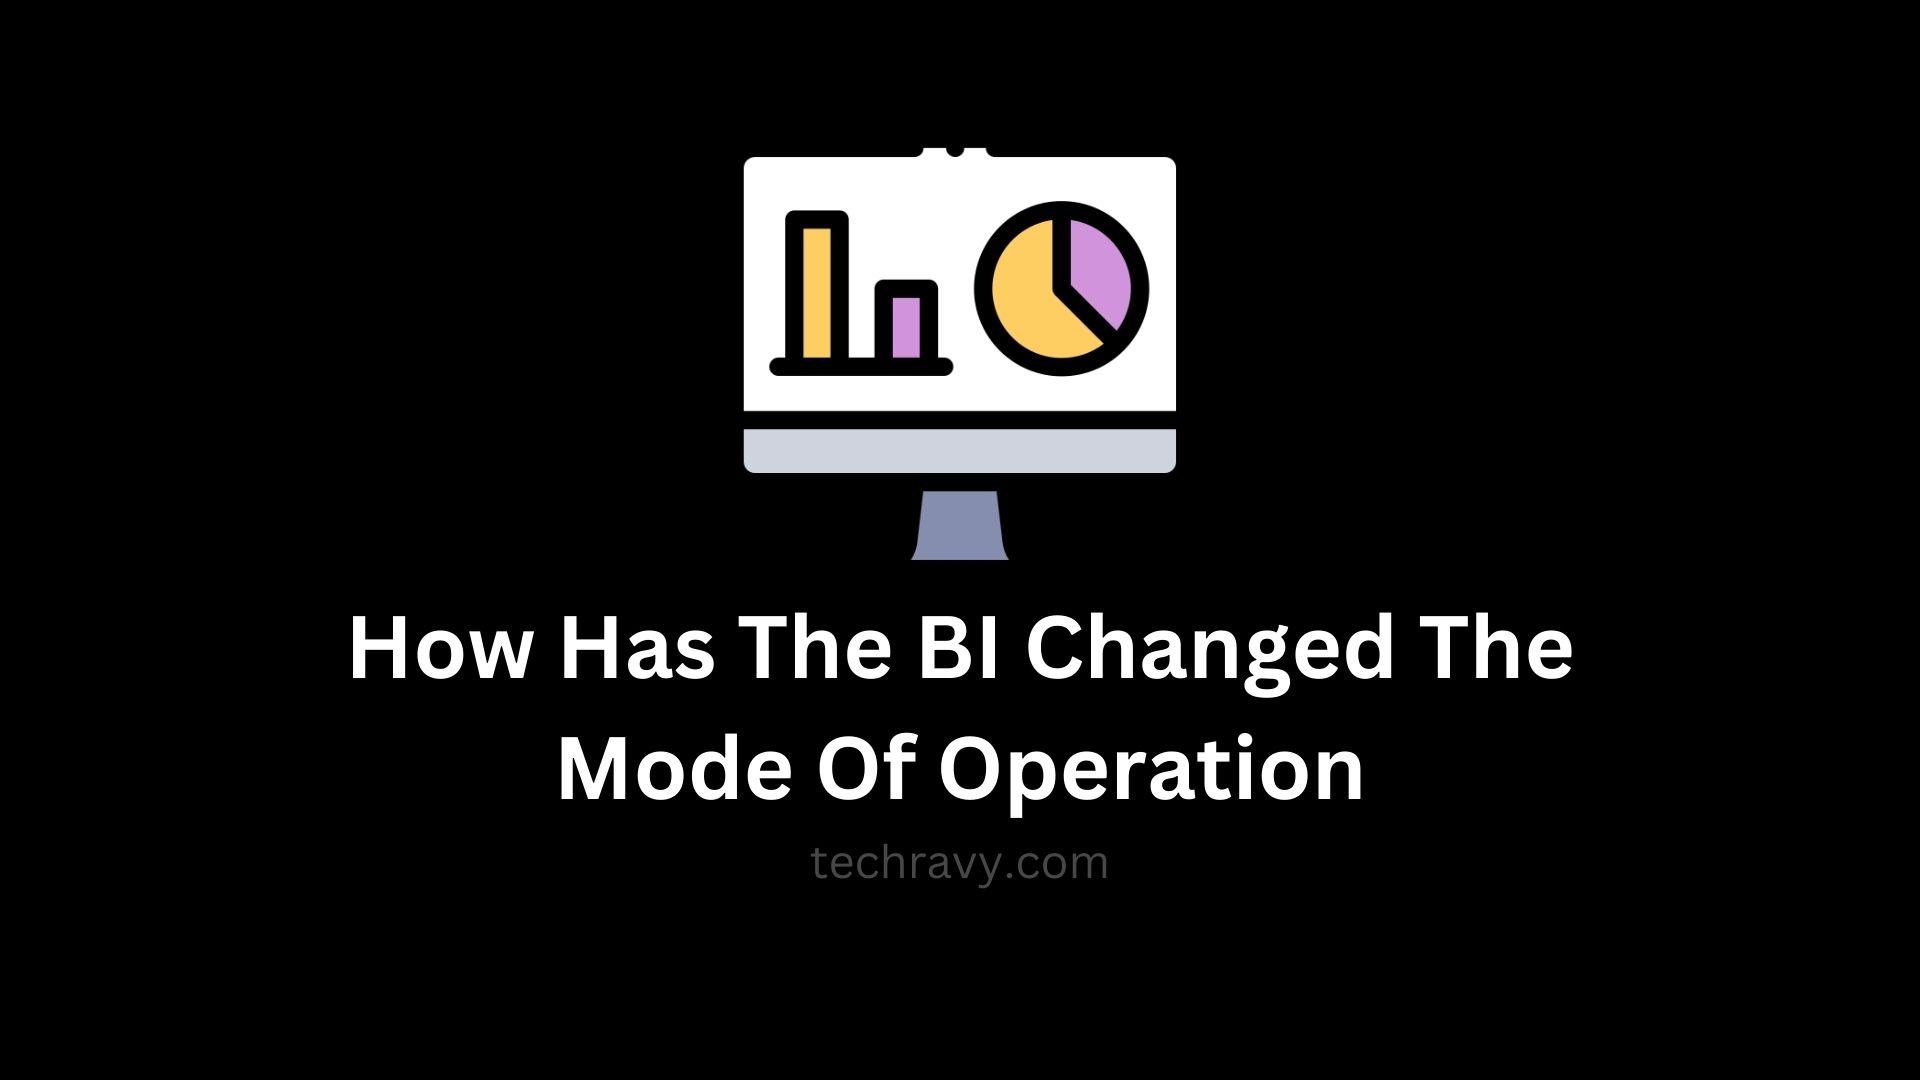 How Has The BI Changed The Mode Of Operation